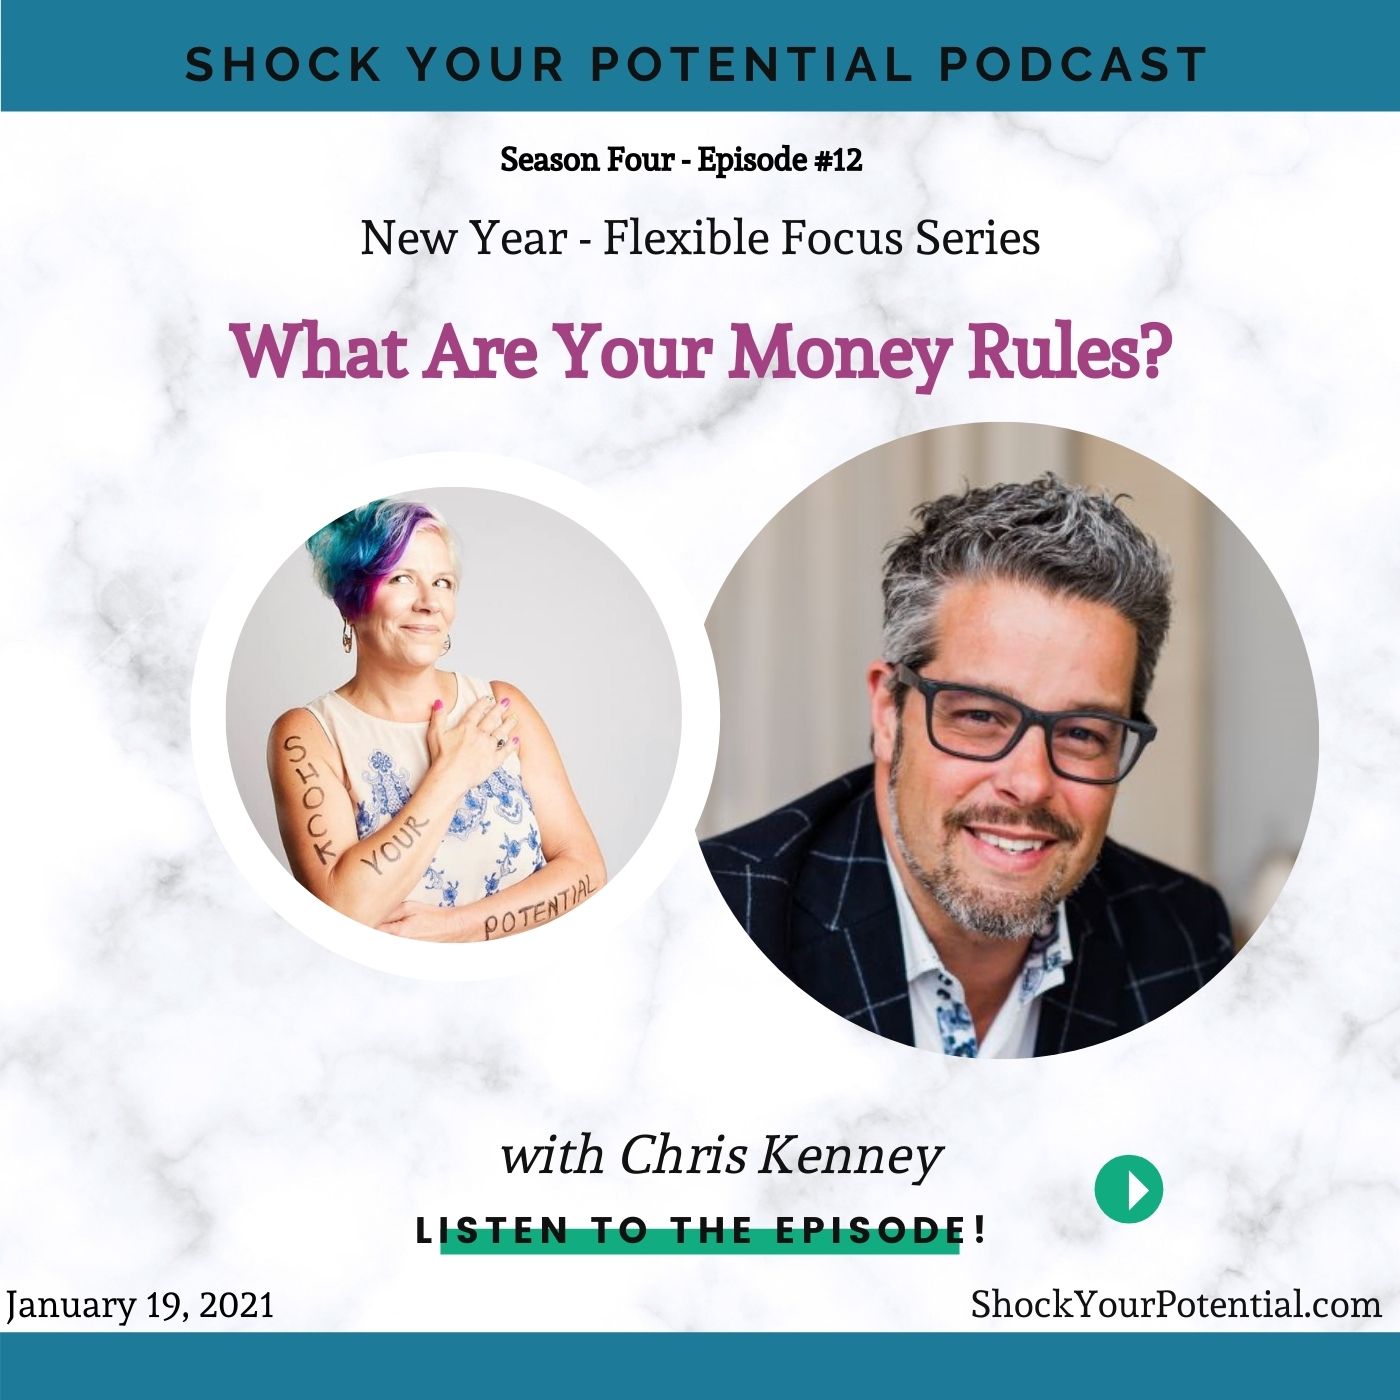 What Are Your Money Rules? – Chris Kenney